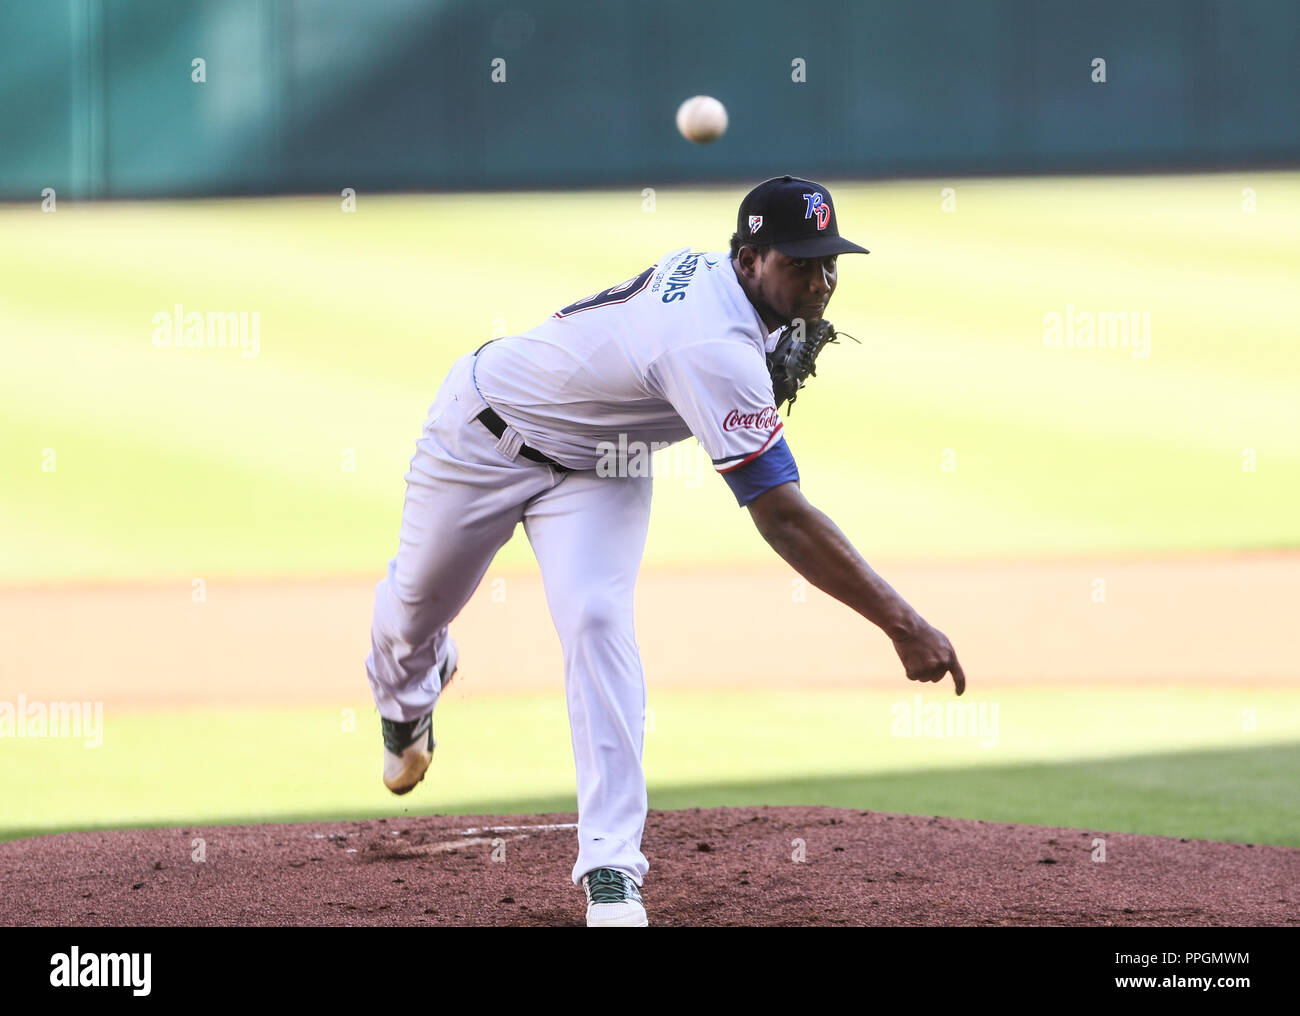 Initial pitcher of Tigres del Licey of Dominican Republic, Lázaro Blanco makes a pitch in the first inning, During the baseball game for the Caribb Stock Photo